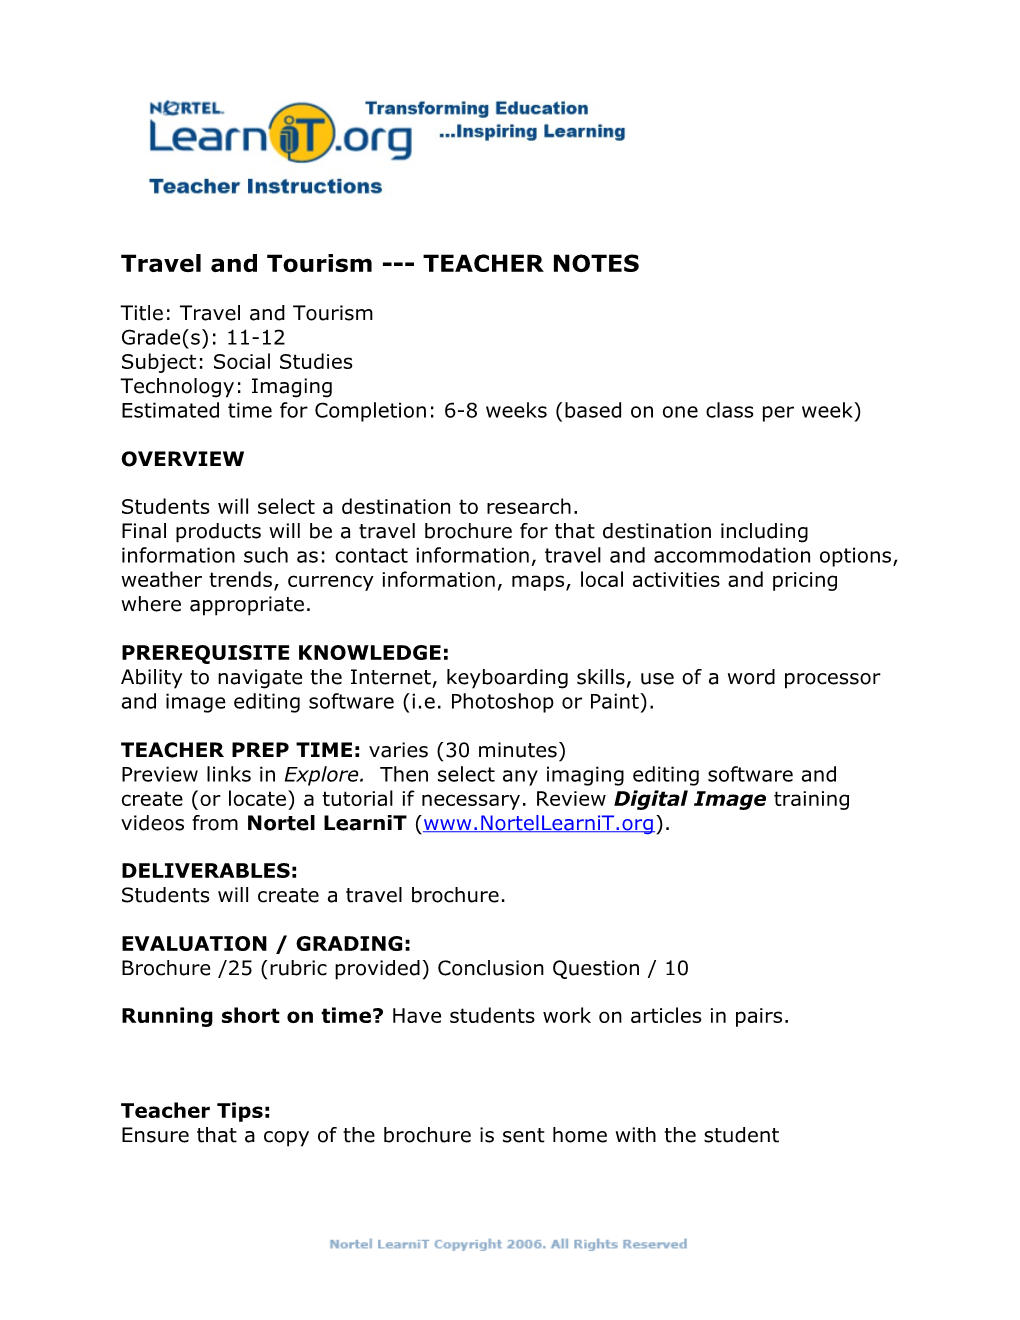 Travel and Tourism TEACHER NOTES